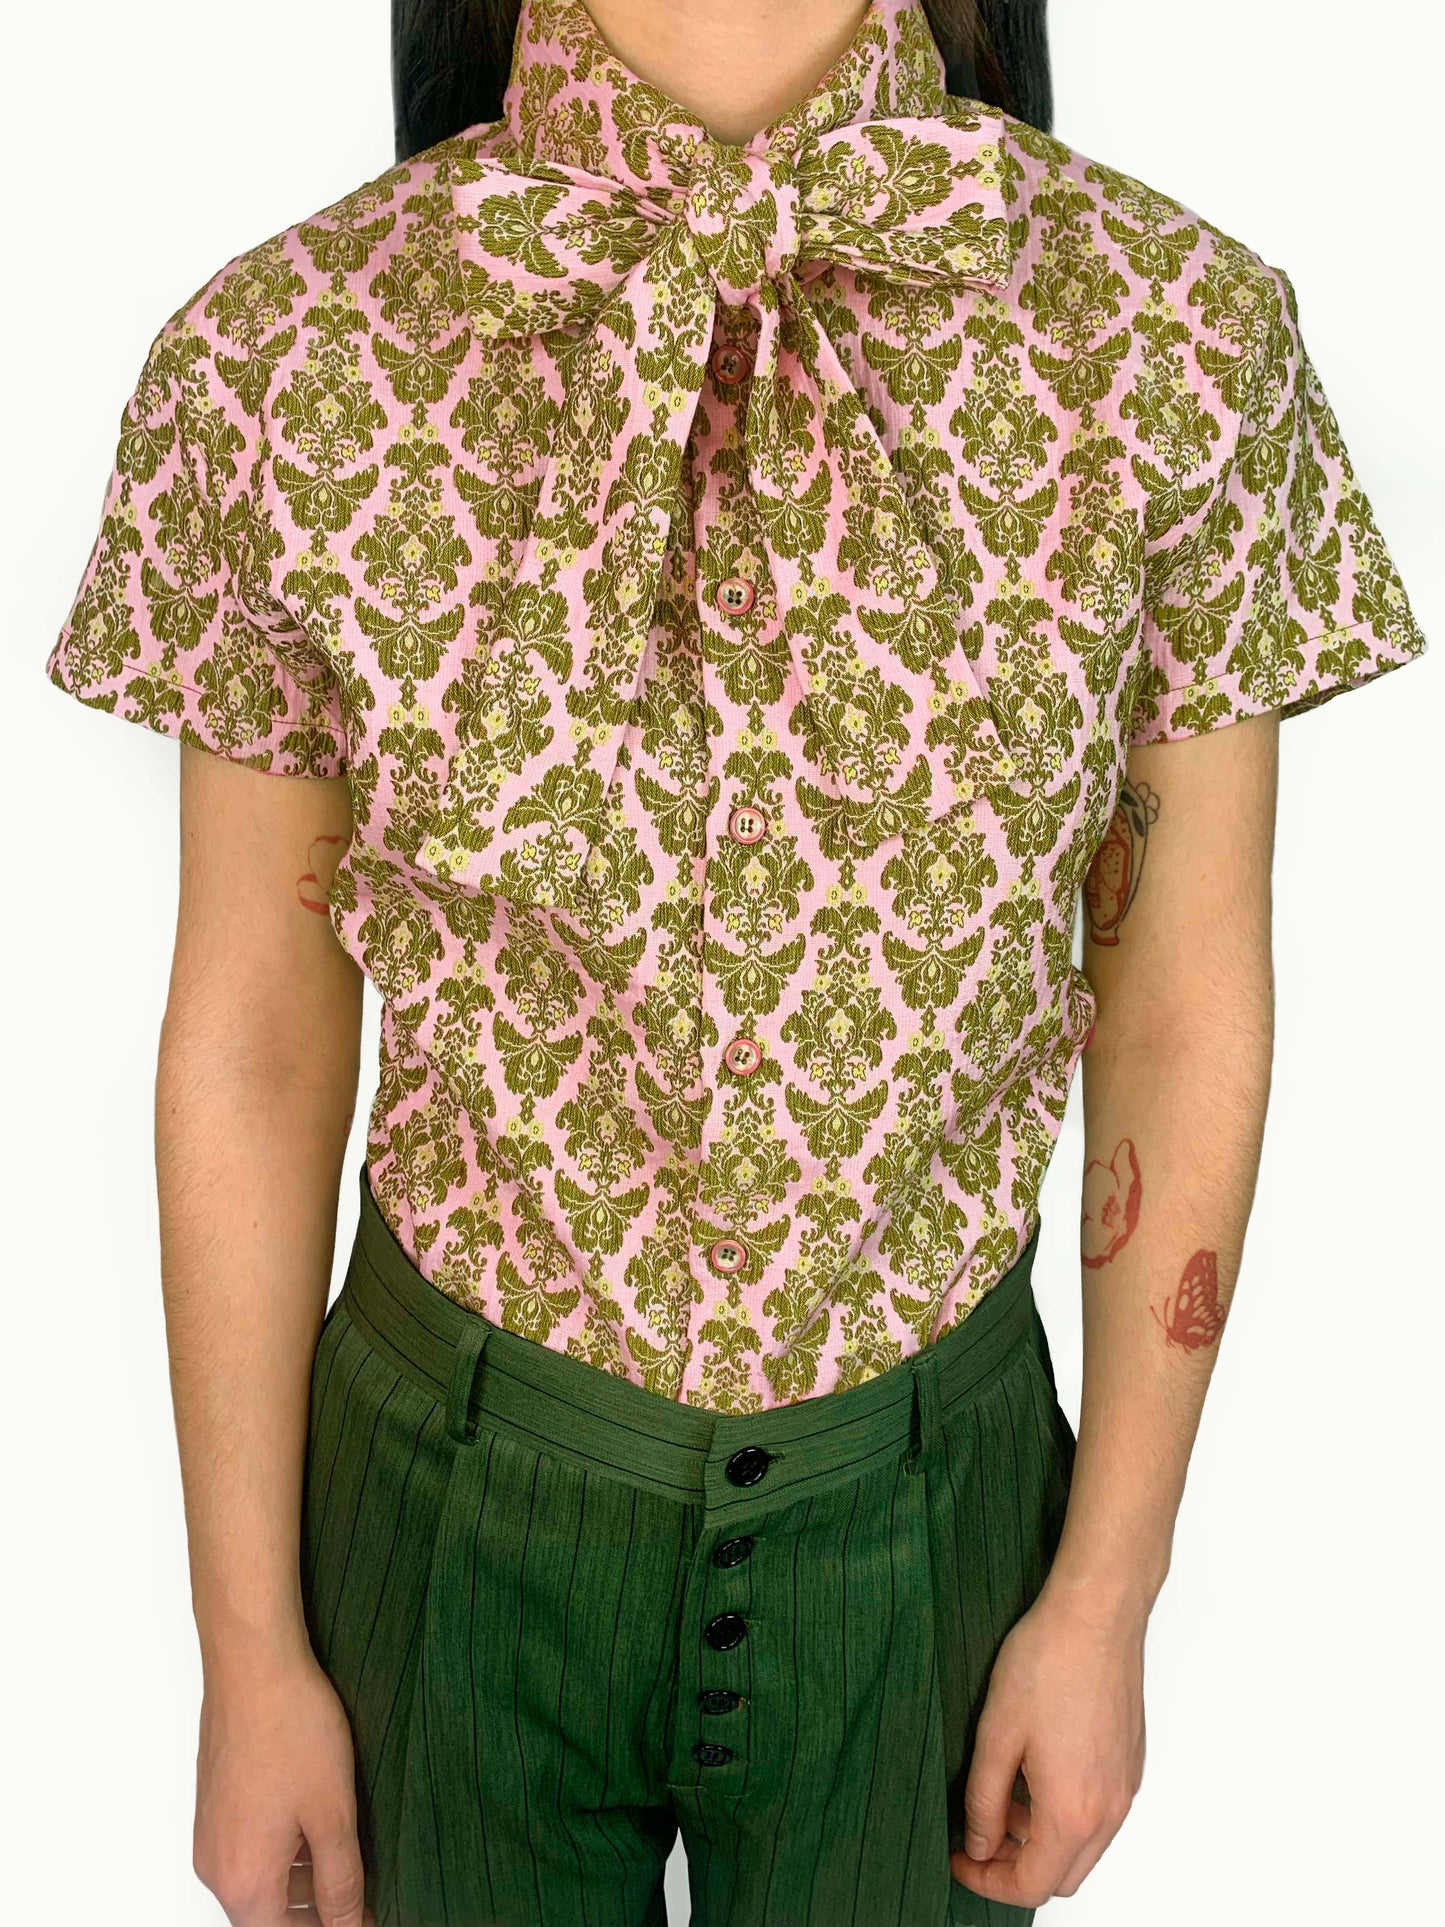 Smart Shirt Pink and Green With Three Collars Short Sleeve Unisex